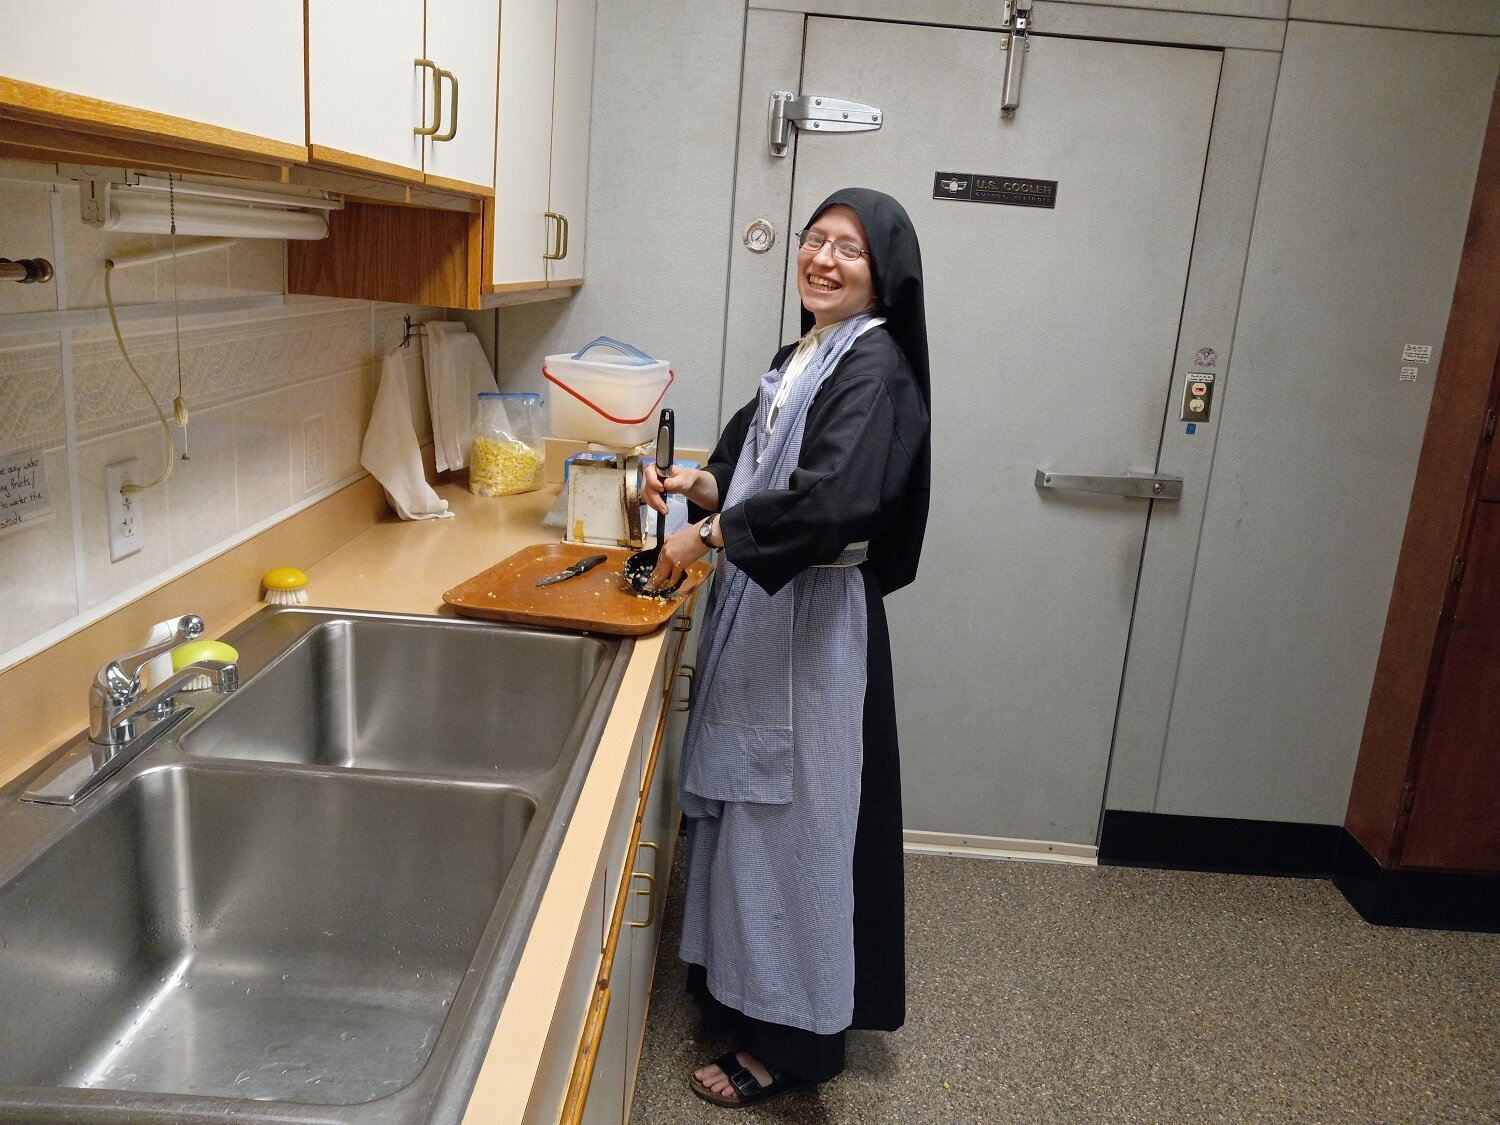  Sr. Frances Marie was in charge of dividing the corn into 4-pound bags for freezing — and she got a little “creative” in trying to keep her habit clean … 